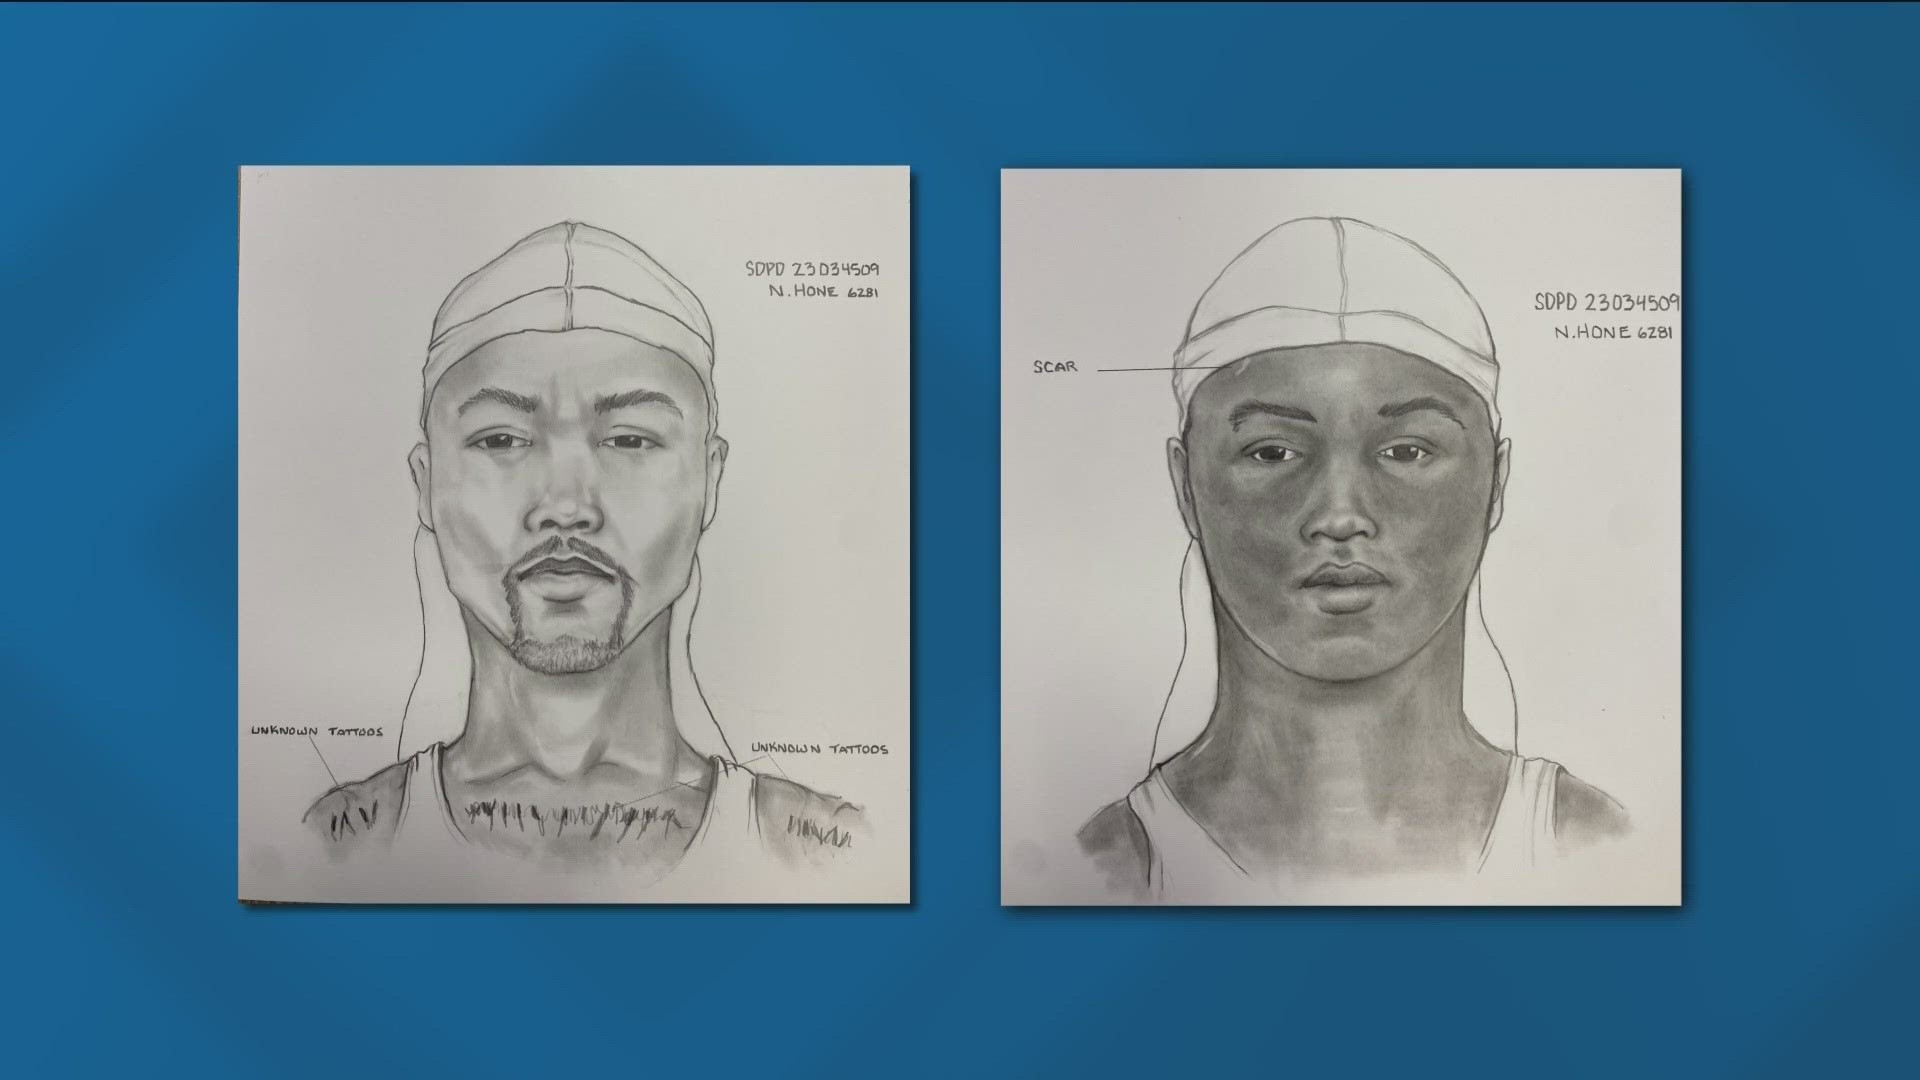 San Diego police are searching for two men who sexually assaulted a woman during an attempted robbery at Skyline Hills Park.